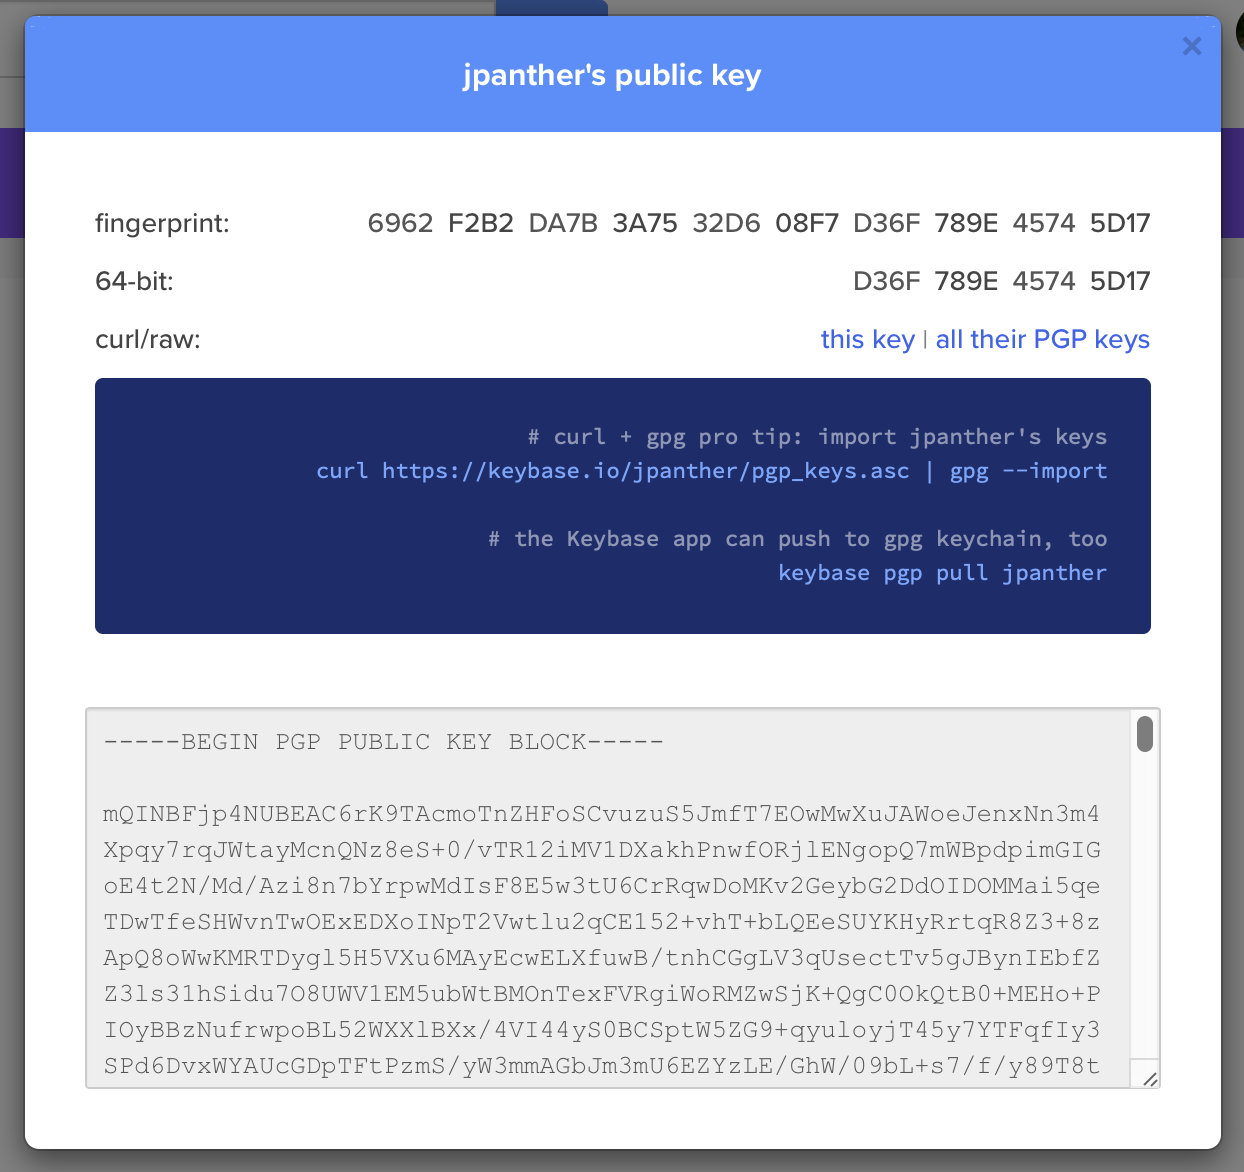 Keybase profile screenshot showing the public PGP key details